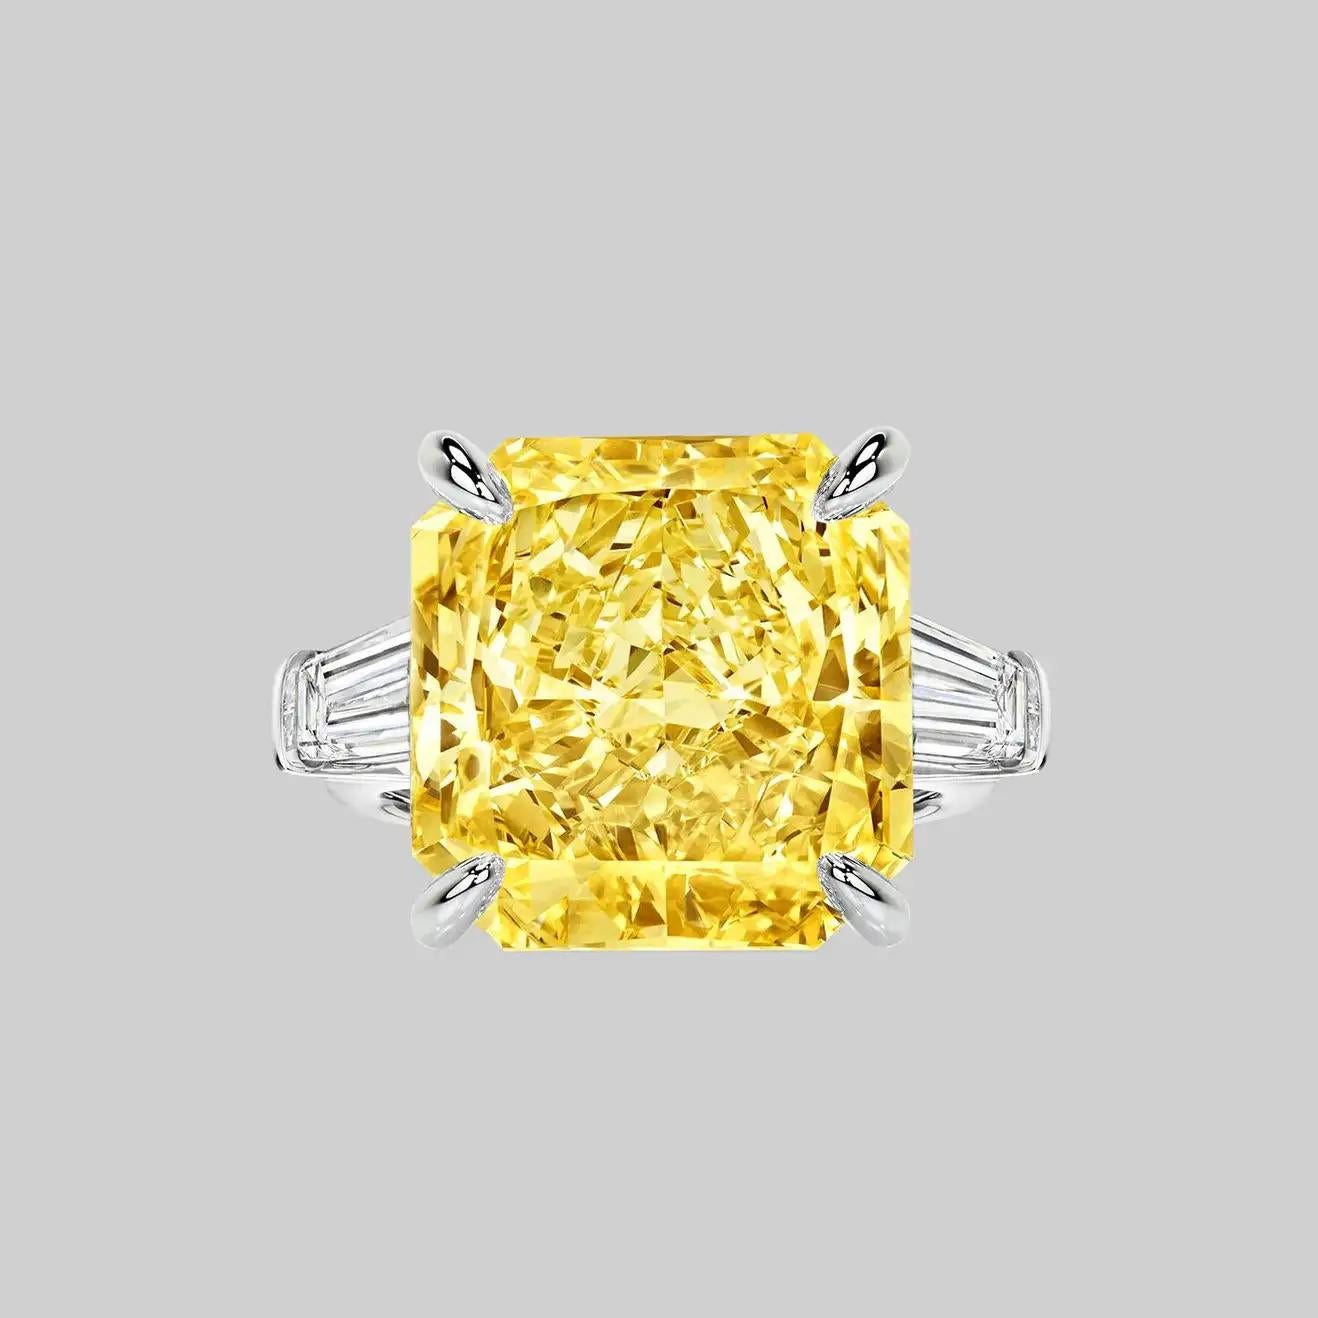 Modern GIA Certified 5 Carat Fancy Yellow Square Radiant Cut Diamond Ring VS1 Clarity For Sale